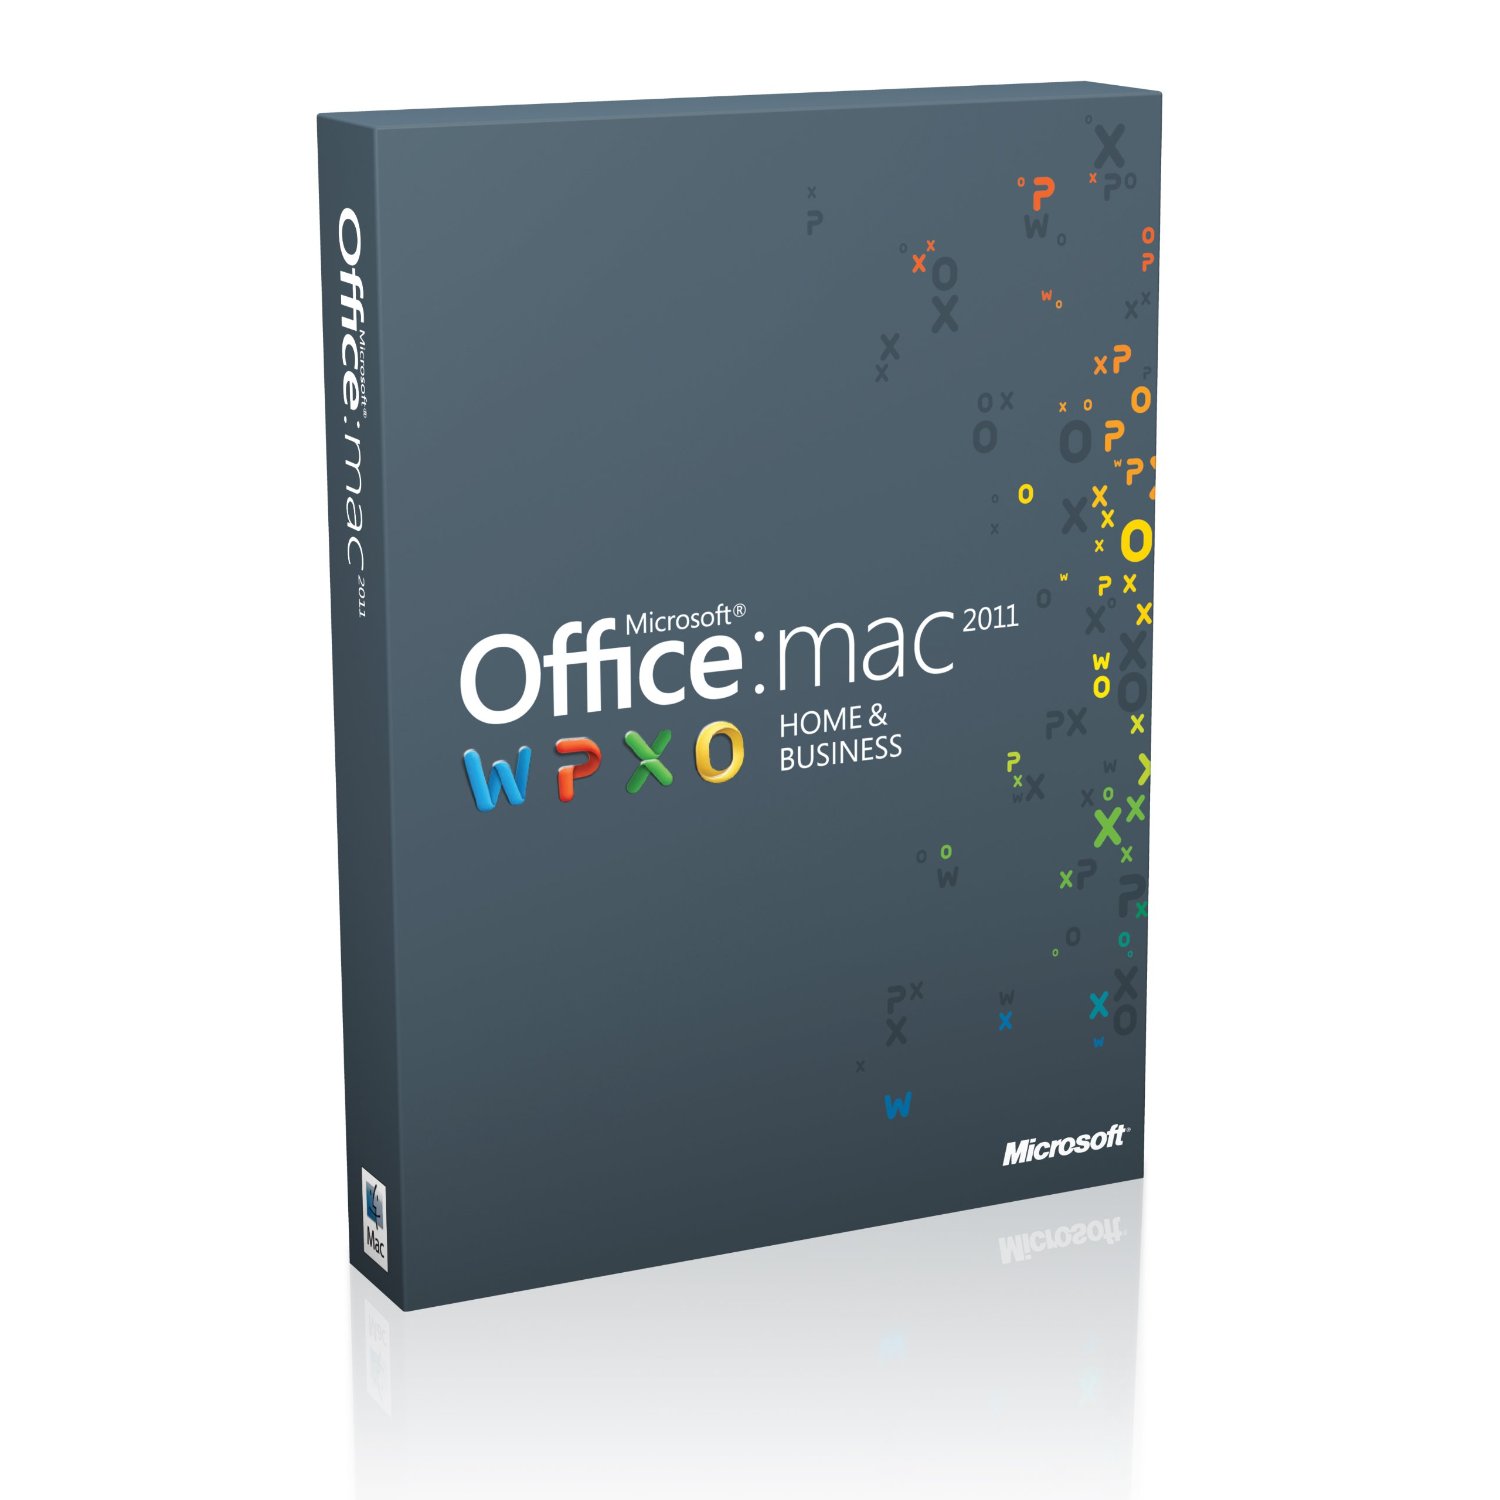 microsoft office 2008 for mac service pack 1 12.1.0